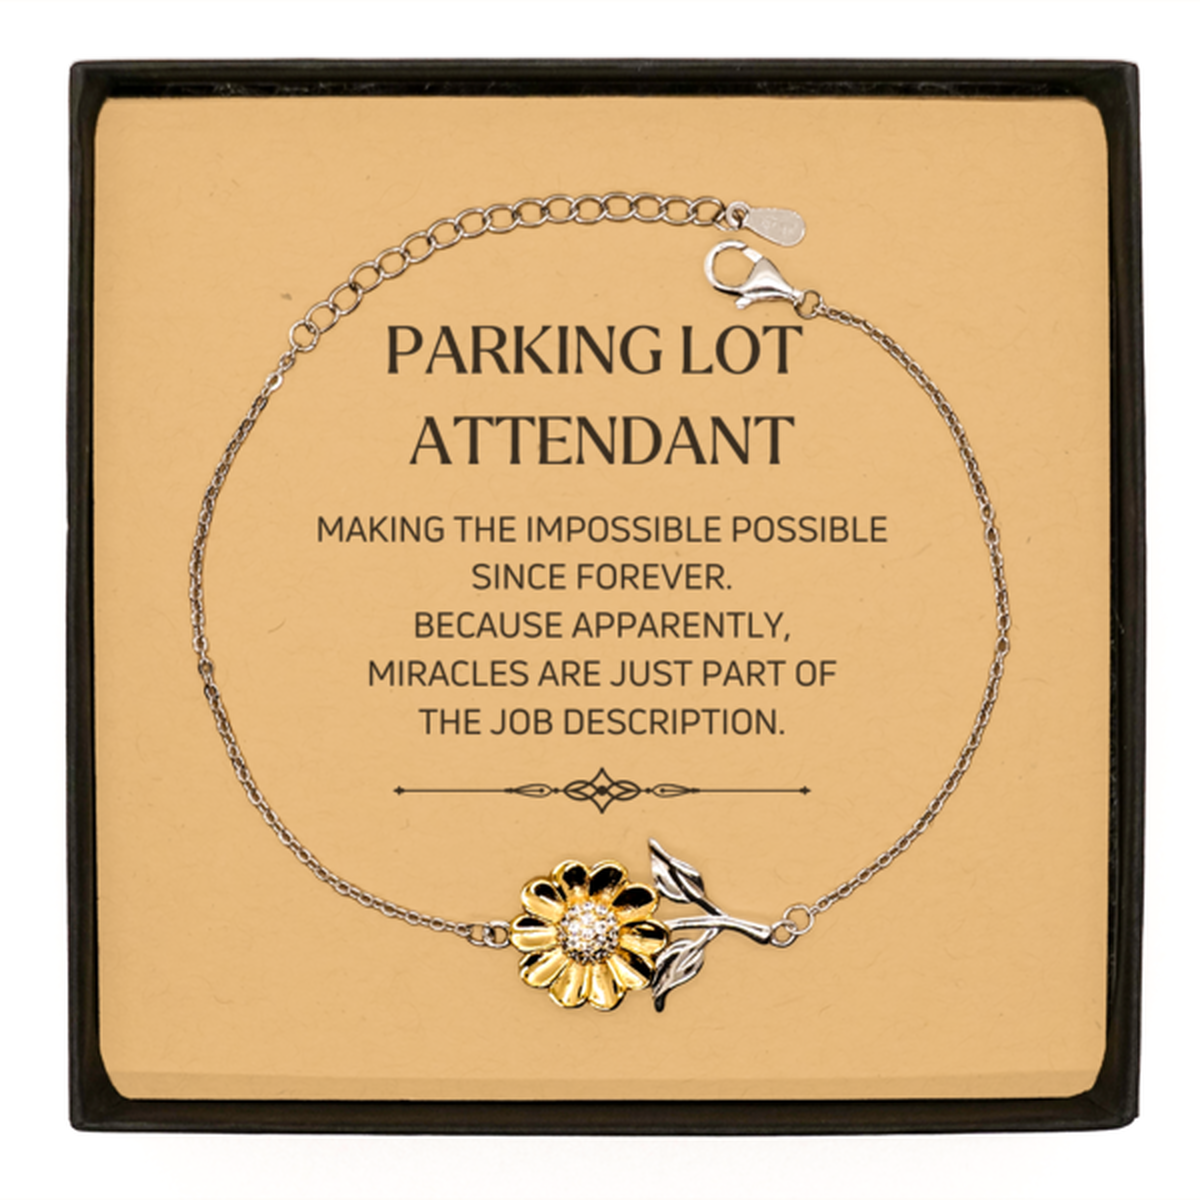 Funny Parking Lot Attendant Gifts, Miracles are just part of the job description, Inspirational Birthday Sunflower Bracelet For Parking Lot Attendant, Men, Women, Coworkers, Friends, Boss